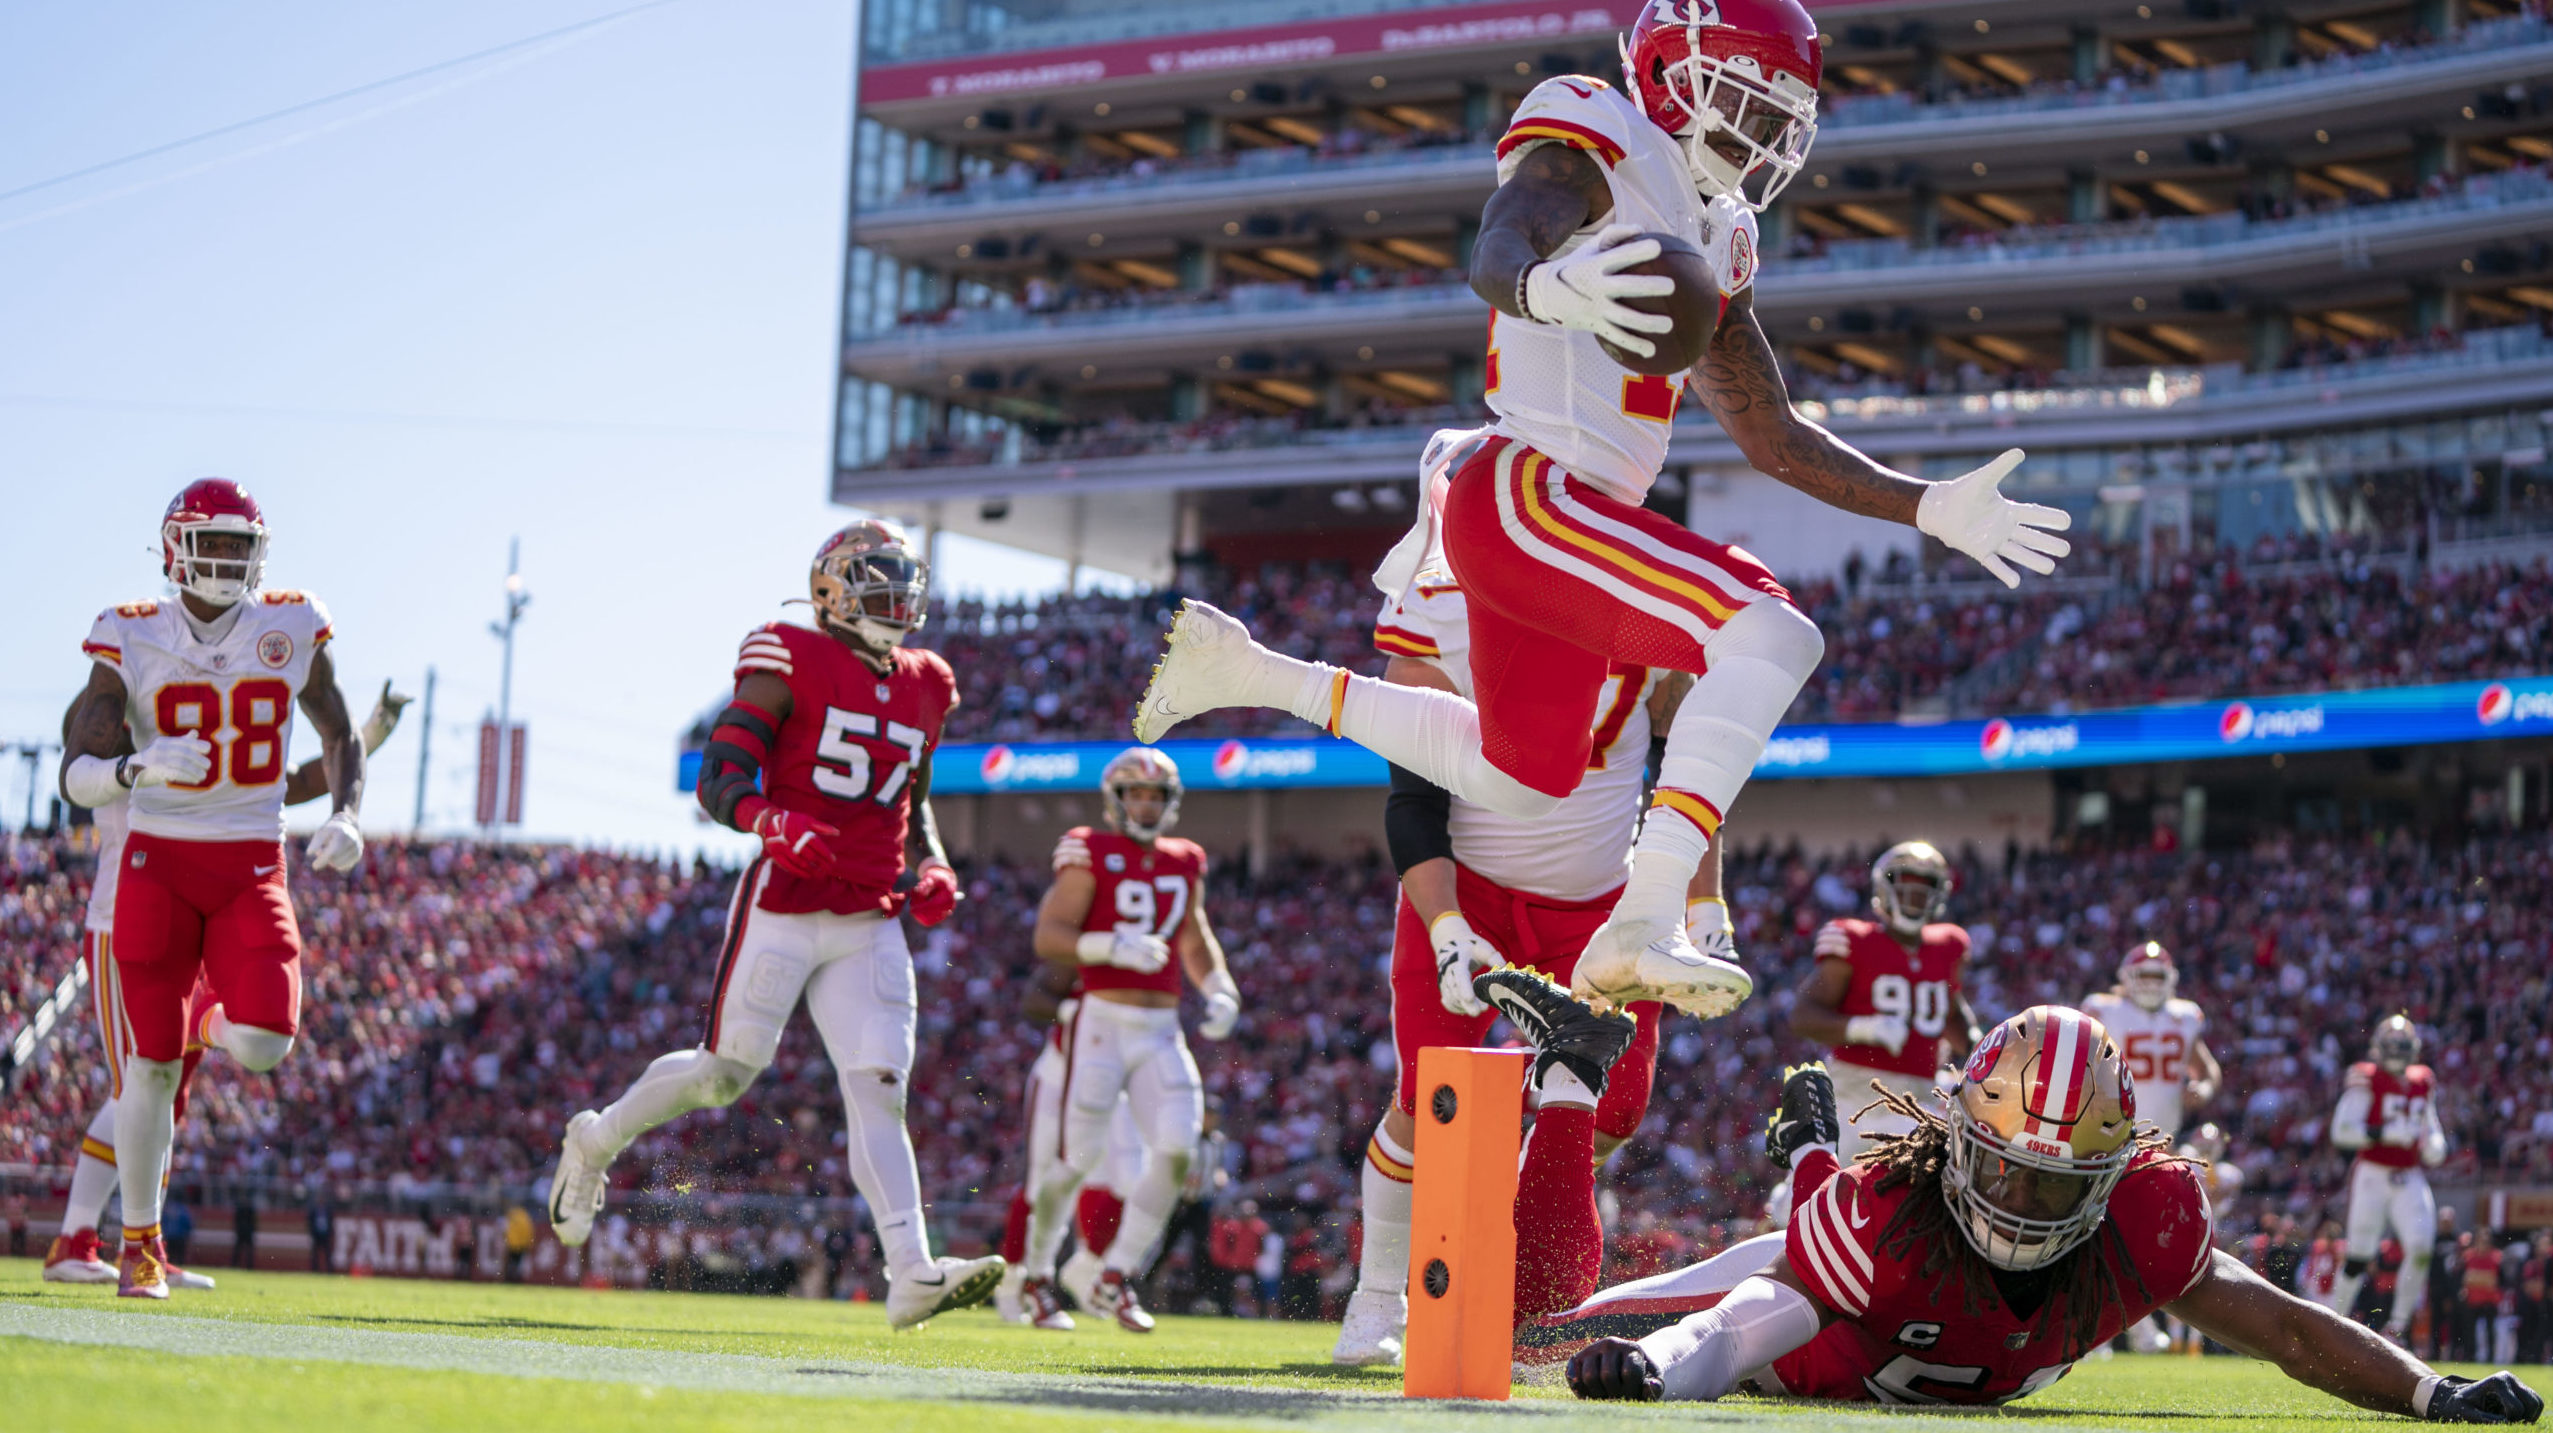 Kansas City Chiefs Frustrated the 49ers’ Defense by Attacking With Speed